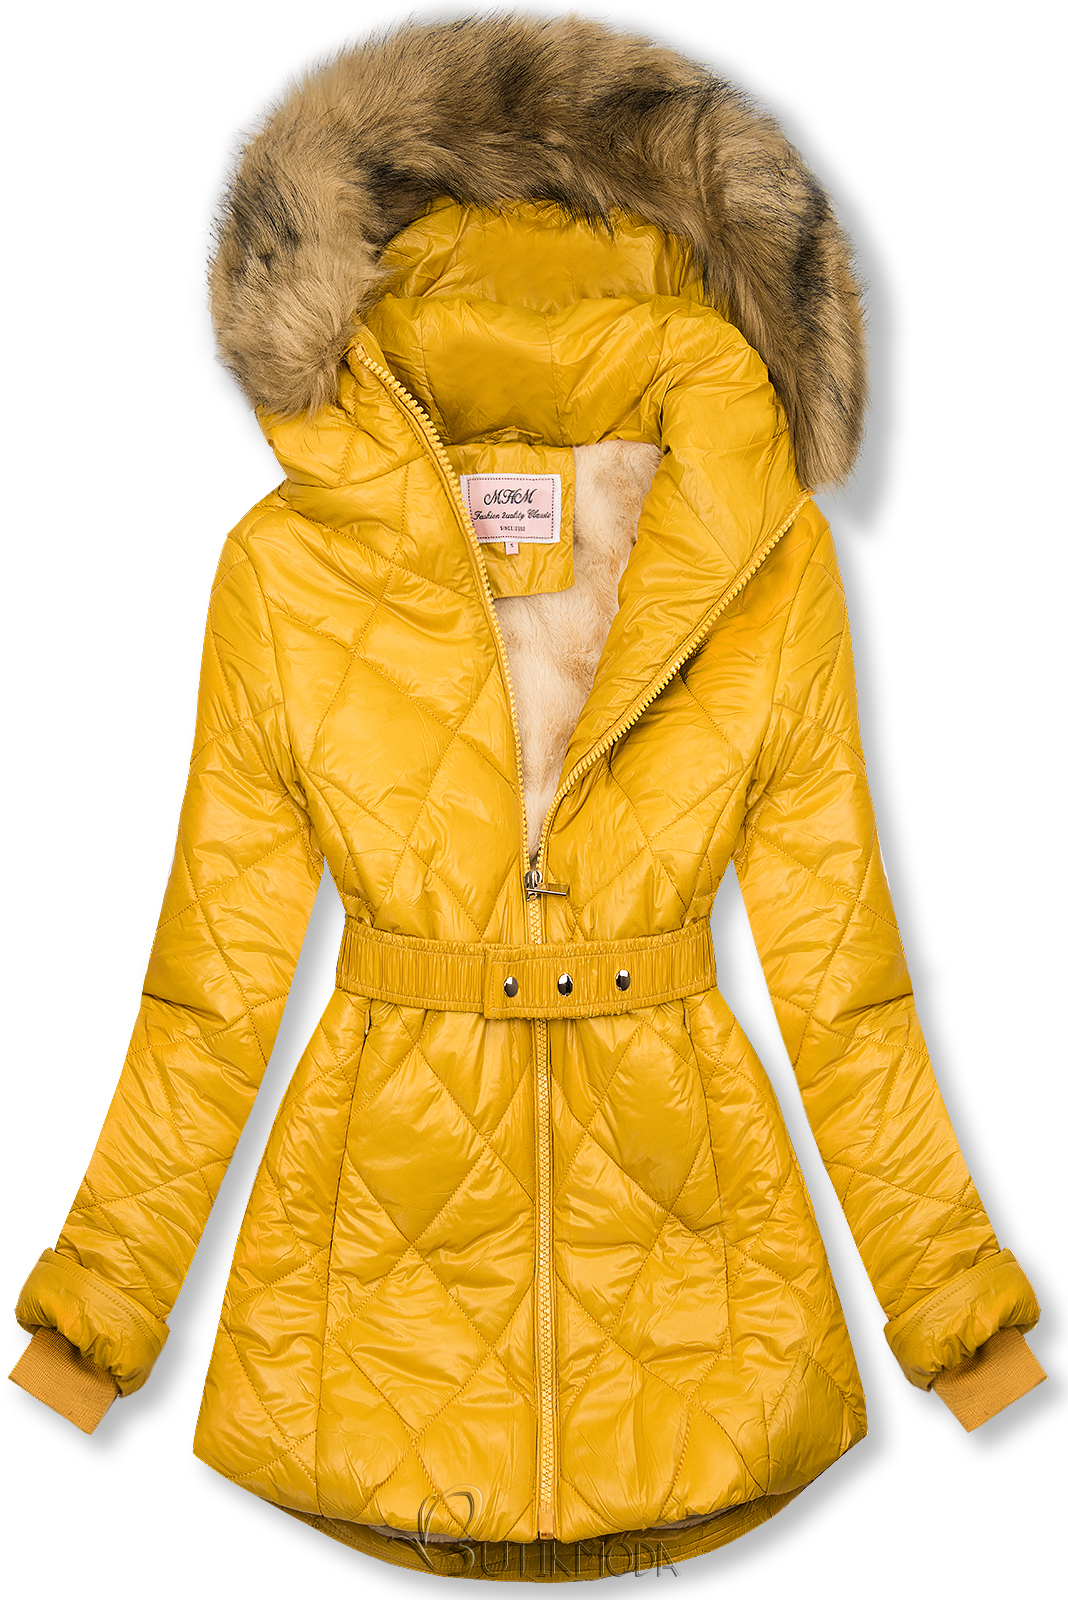 Belted winter jacket in yellow